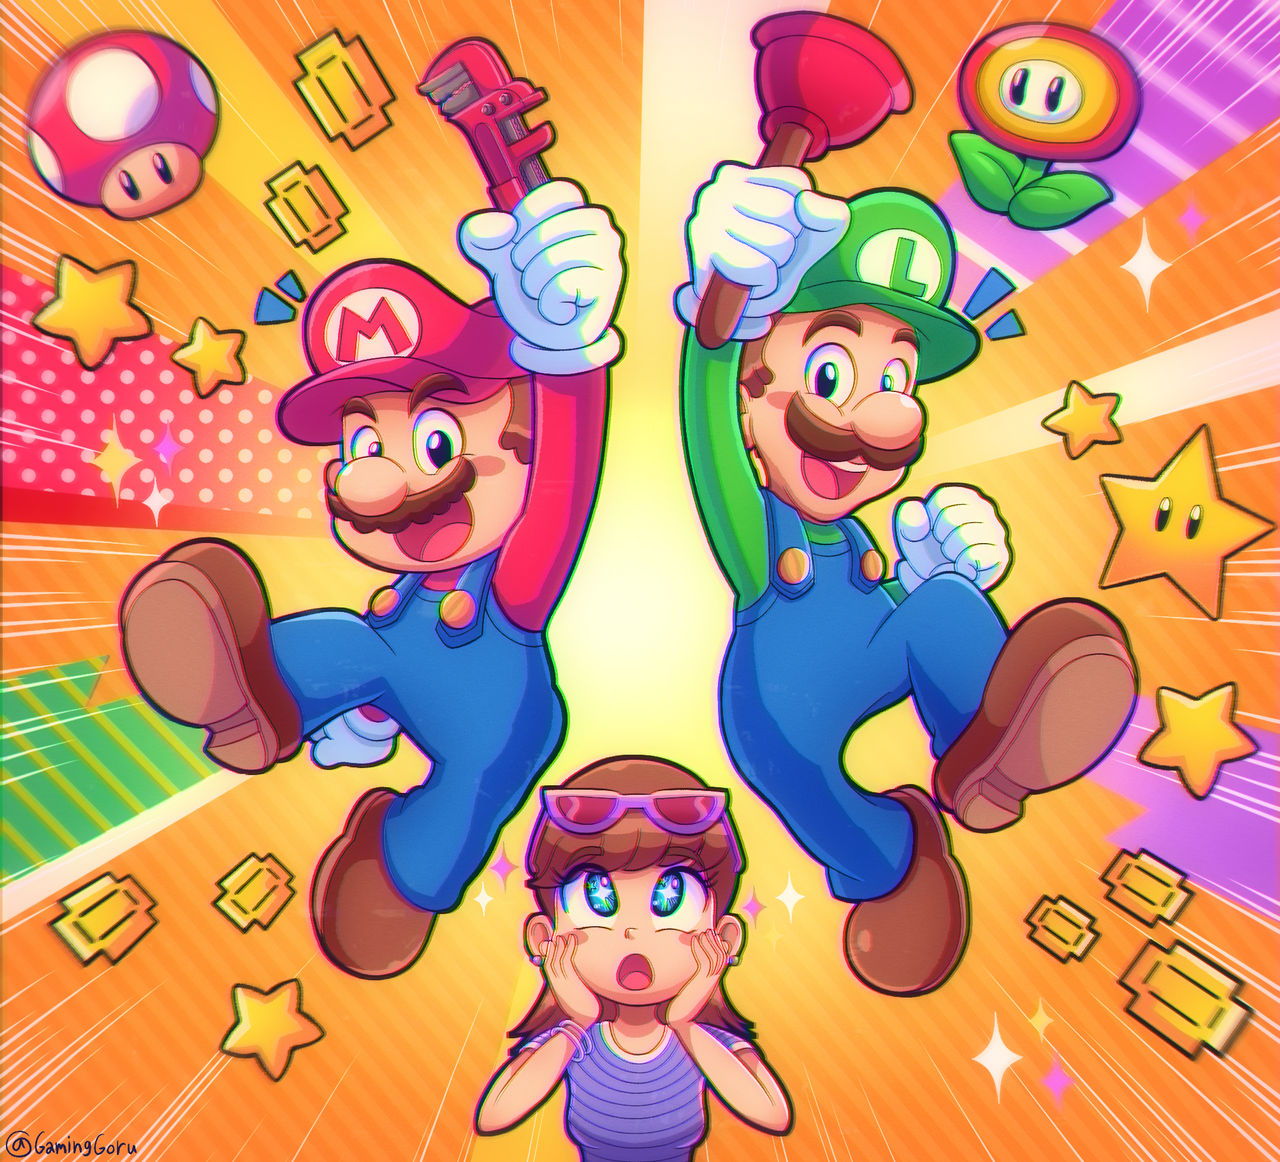 We're the Mario Brothers! : . by GamingGoru on DeviantArt